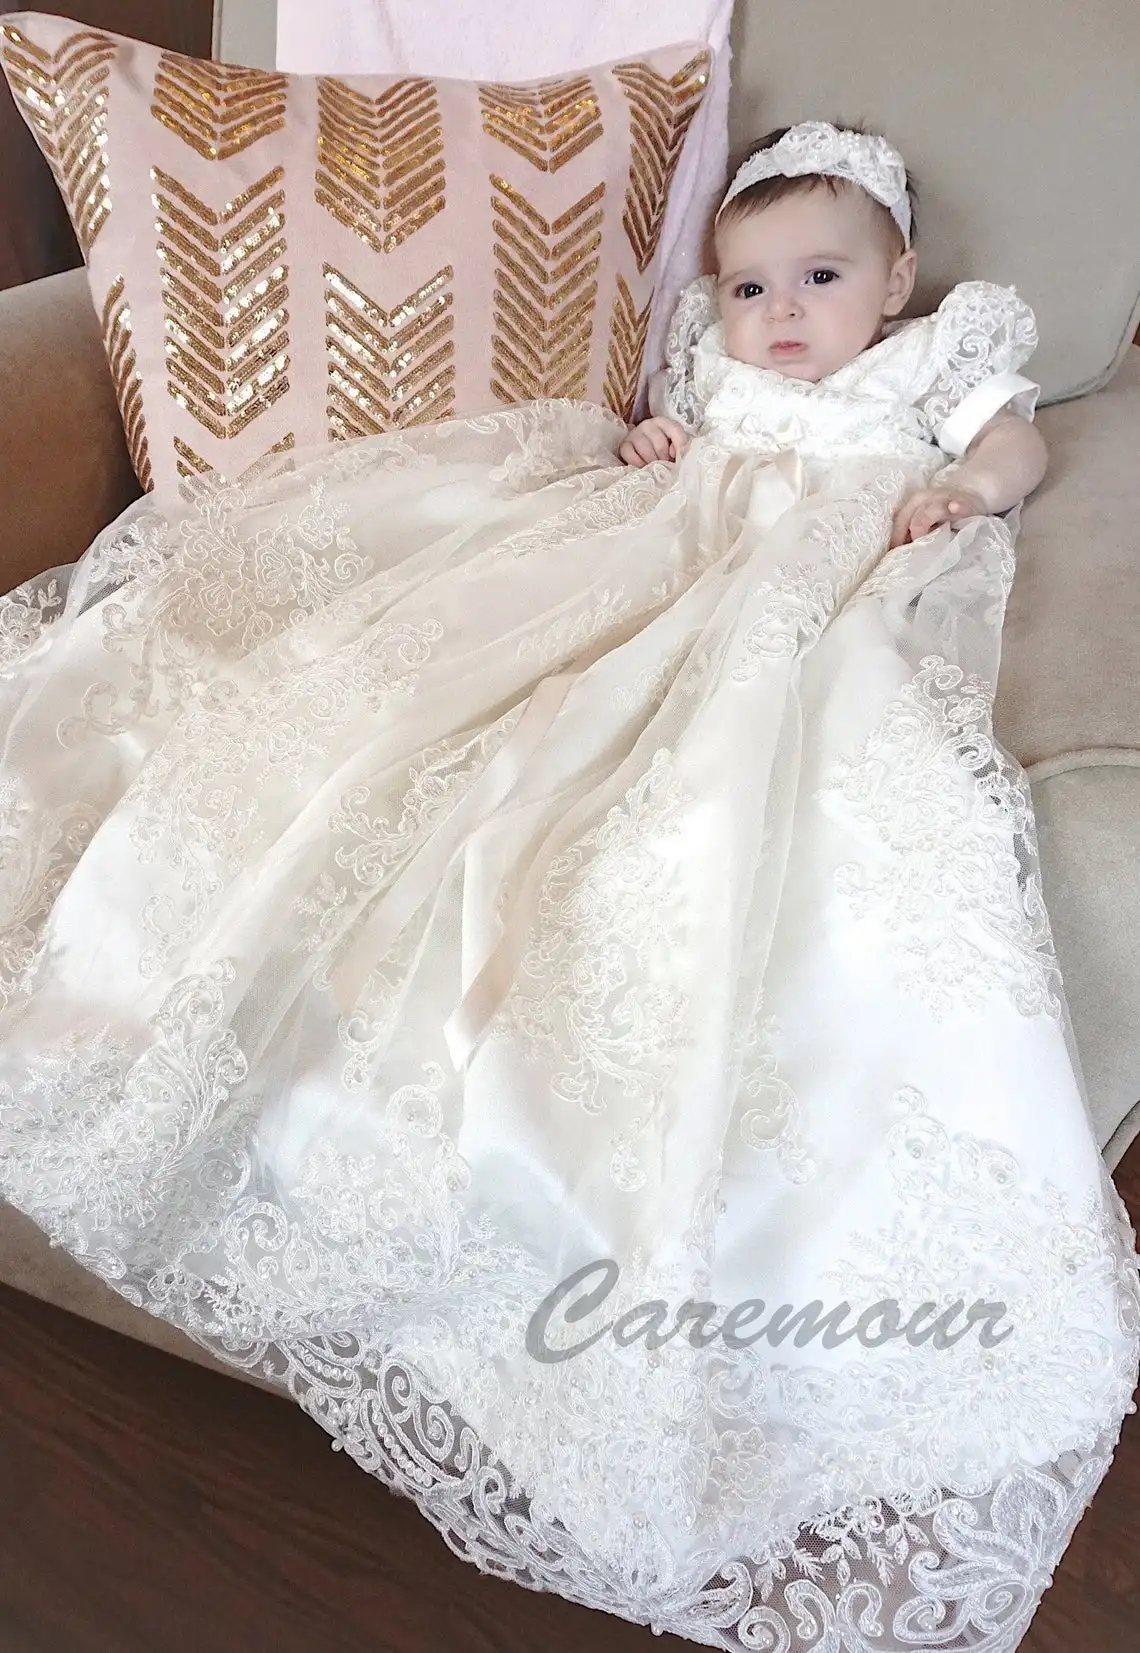 

Stunning Sequined Lace Christening Gown Baptism dress for baby girl Girls Christening Gown